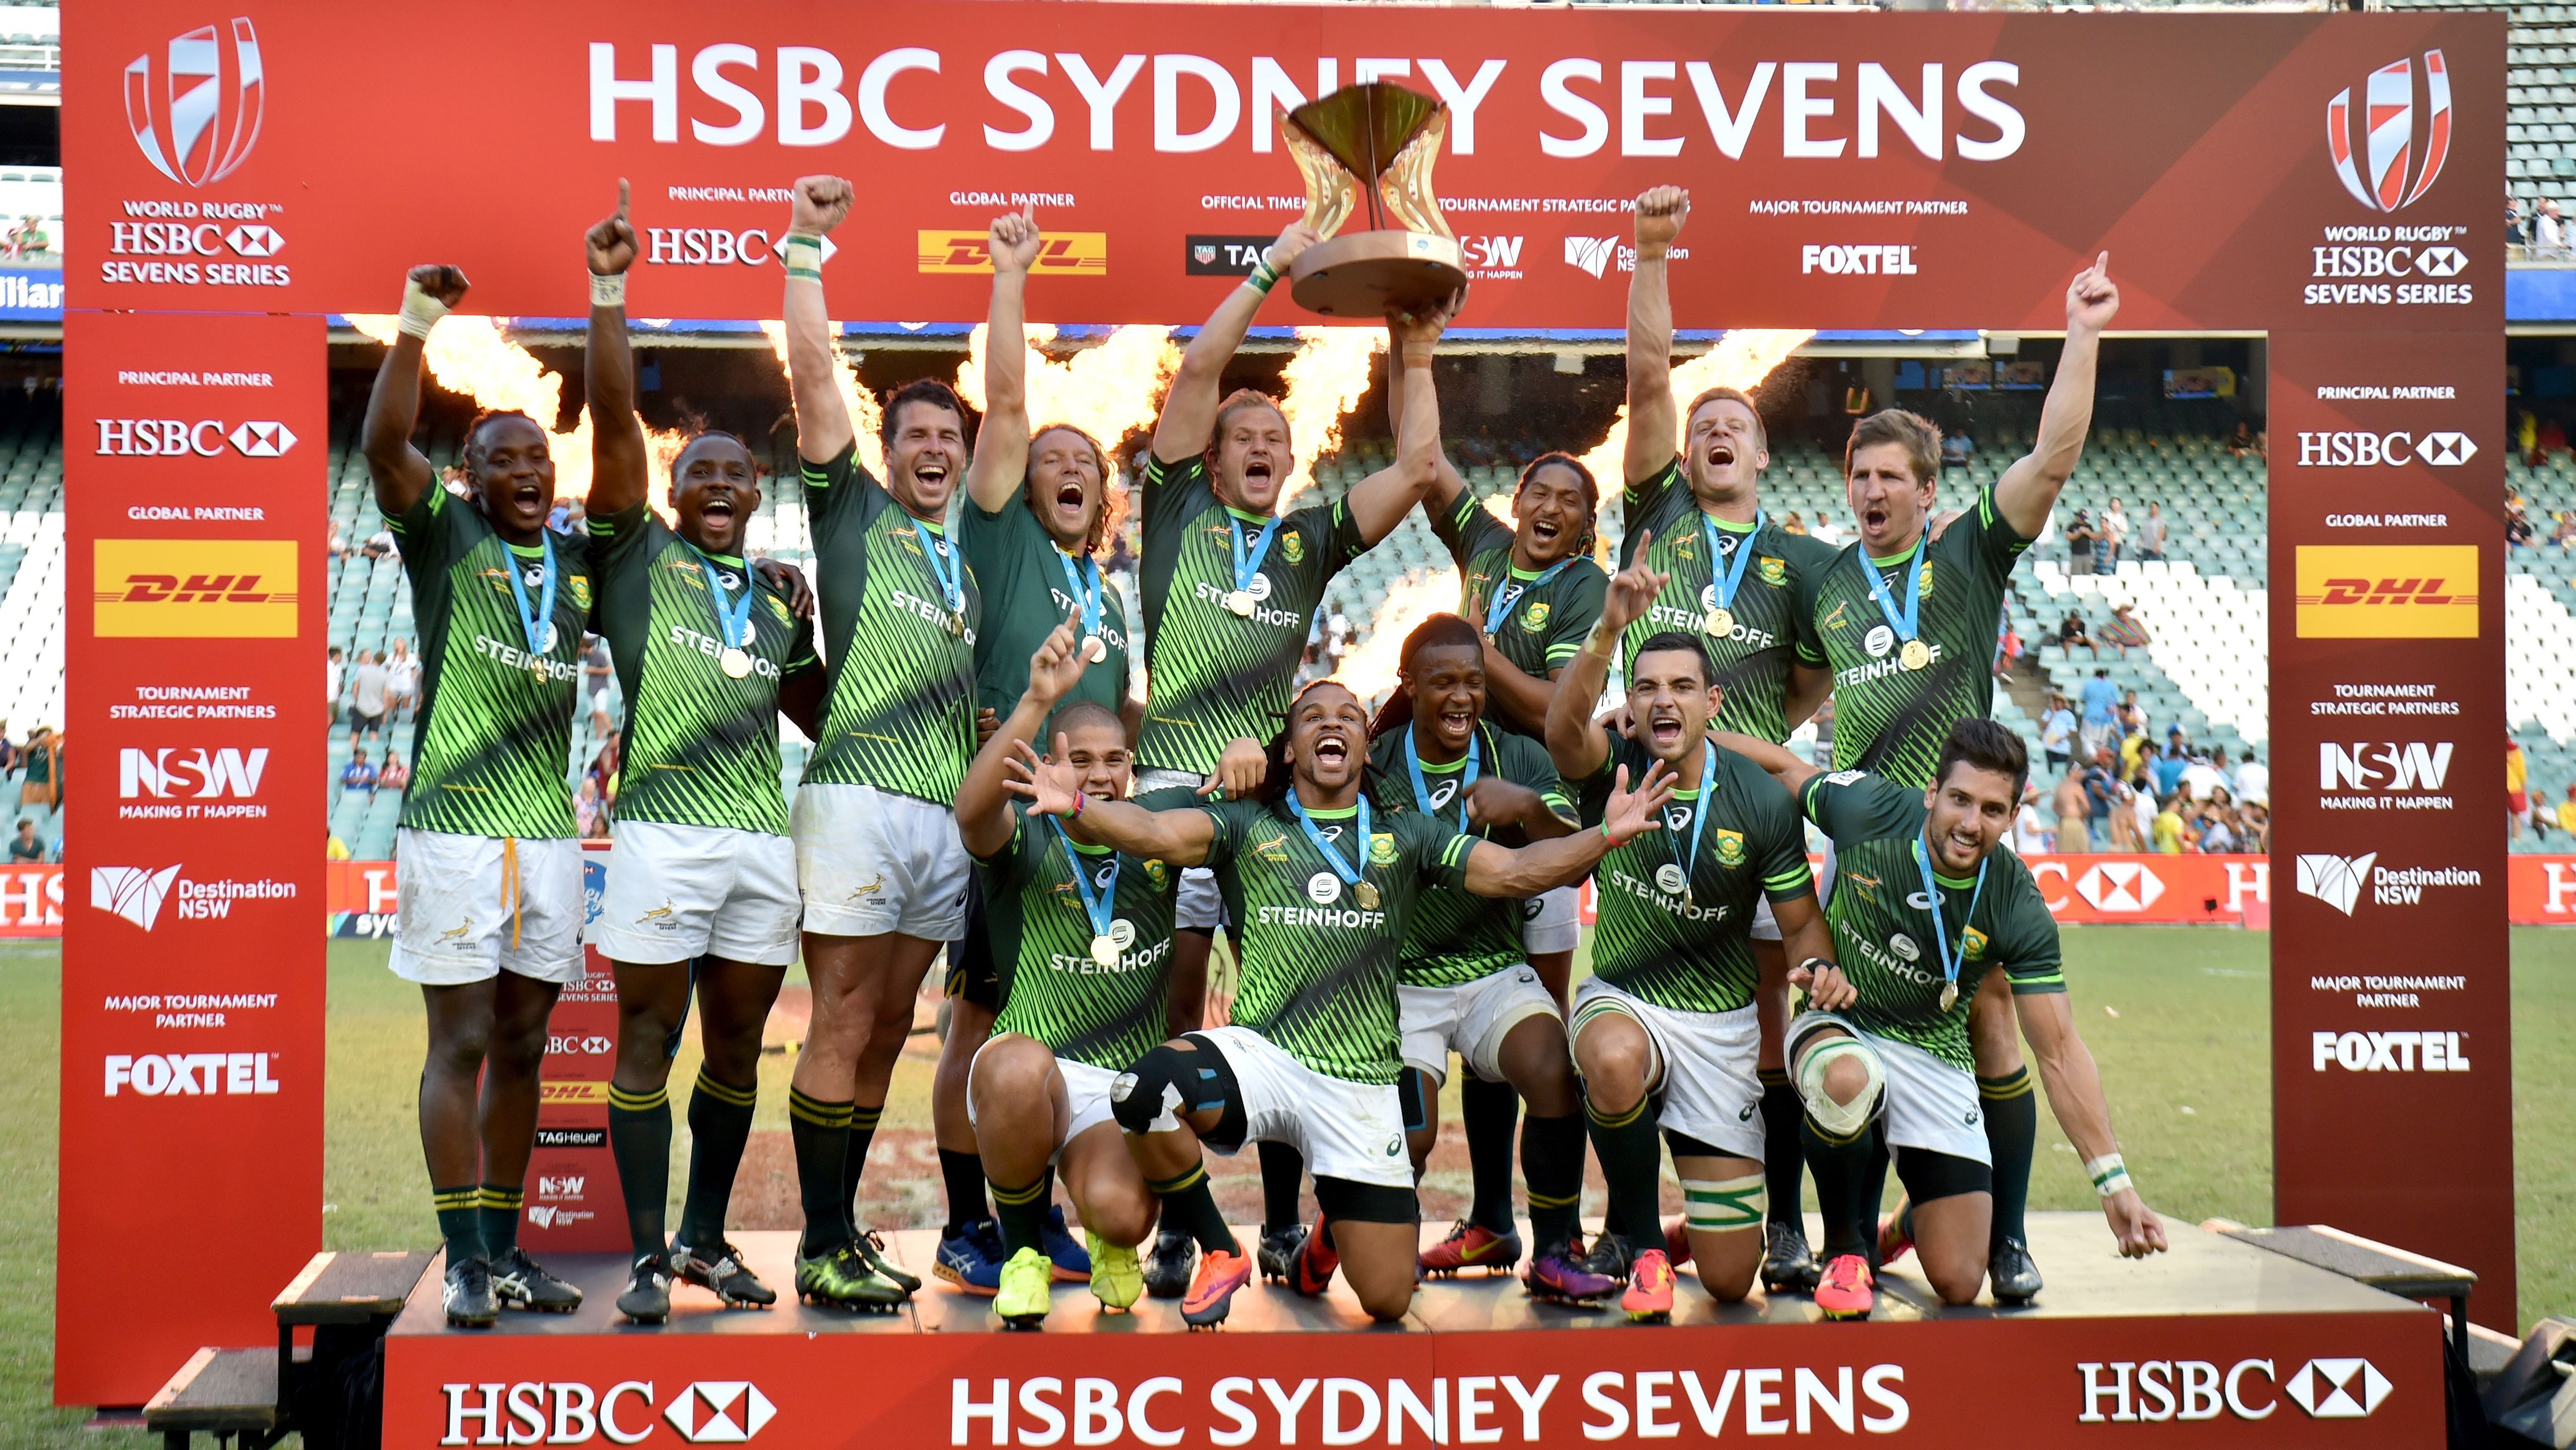 South Africa beat England to get revenge after defeat  in December's Cape Town final.